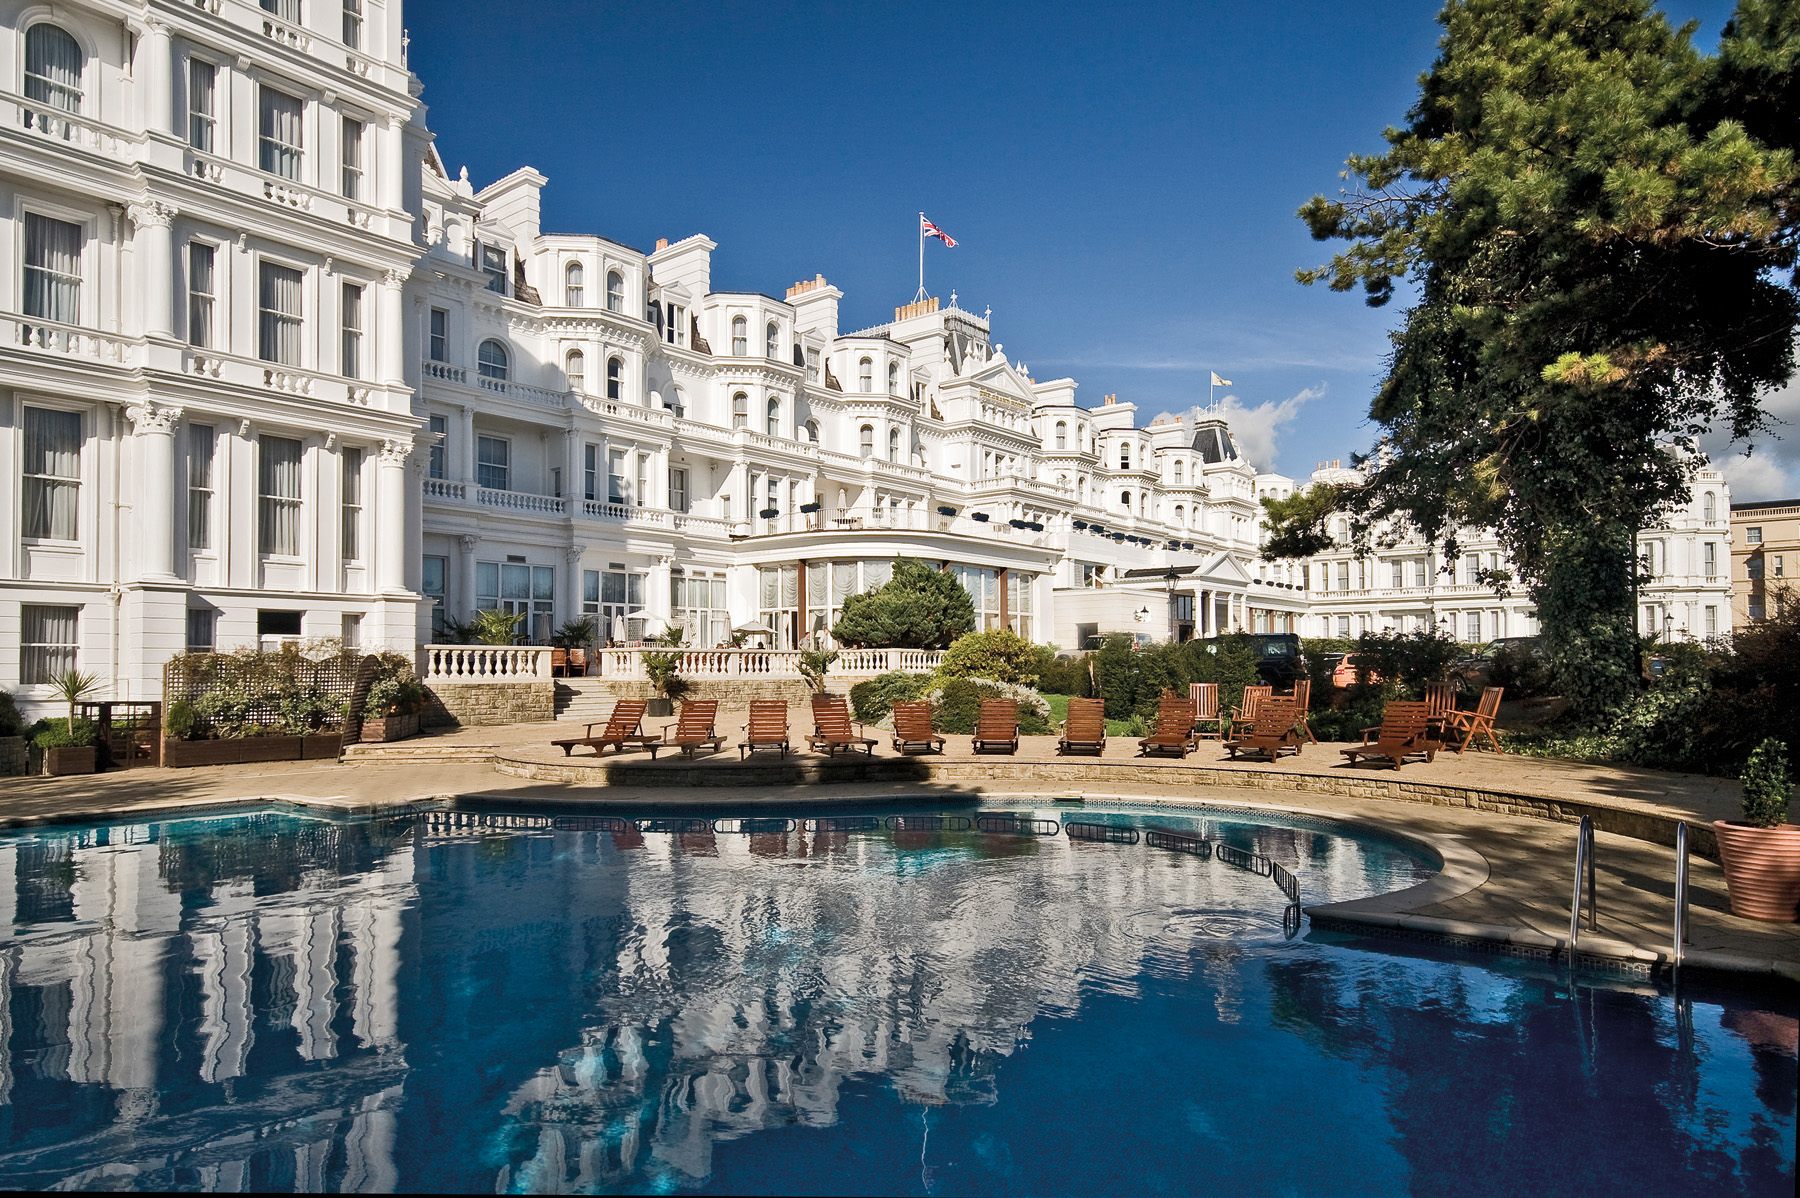 The Grand Hotel, Eastbourne.  You and a guest will have the chance to enjoy an overnight stay in The